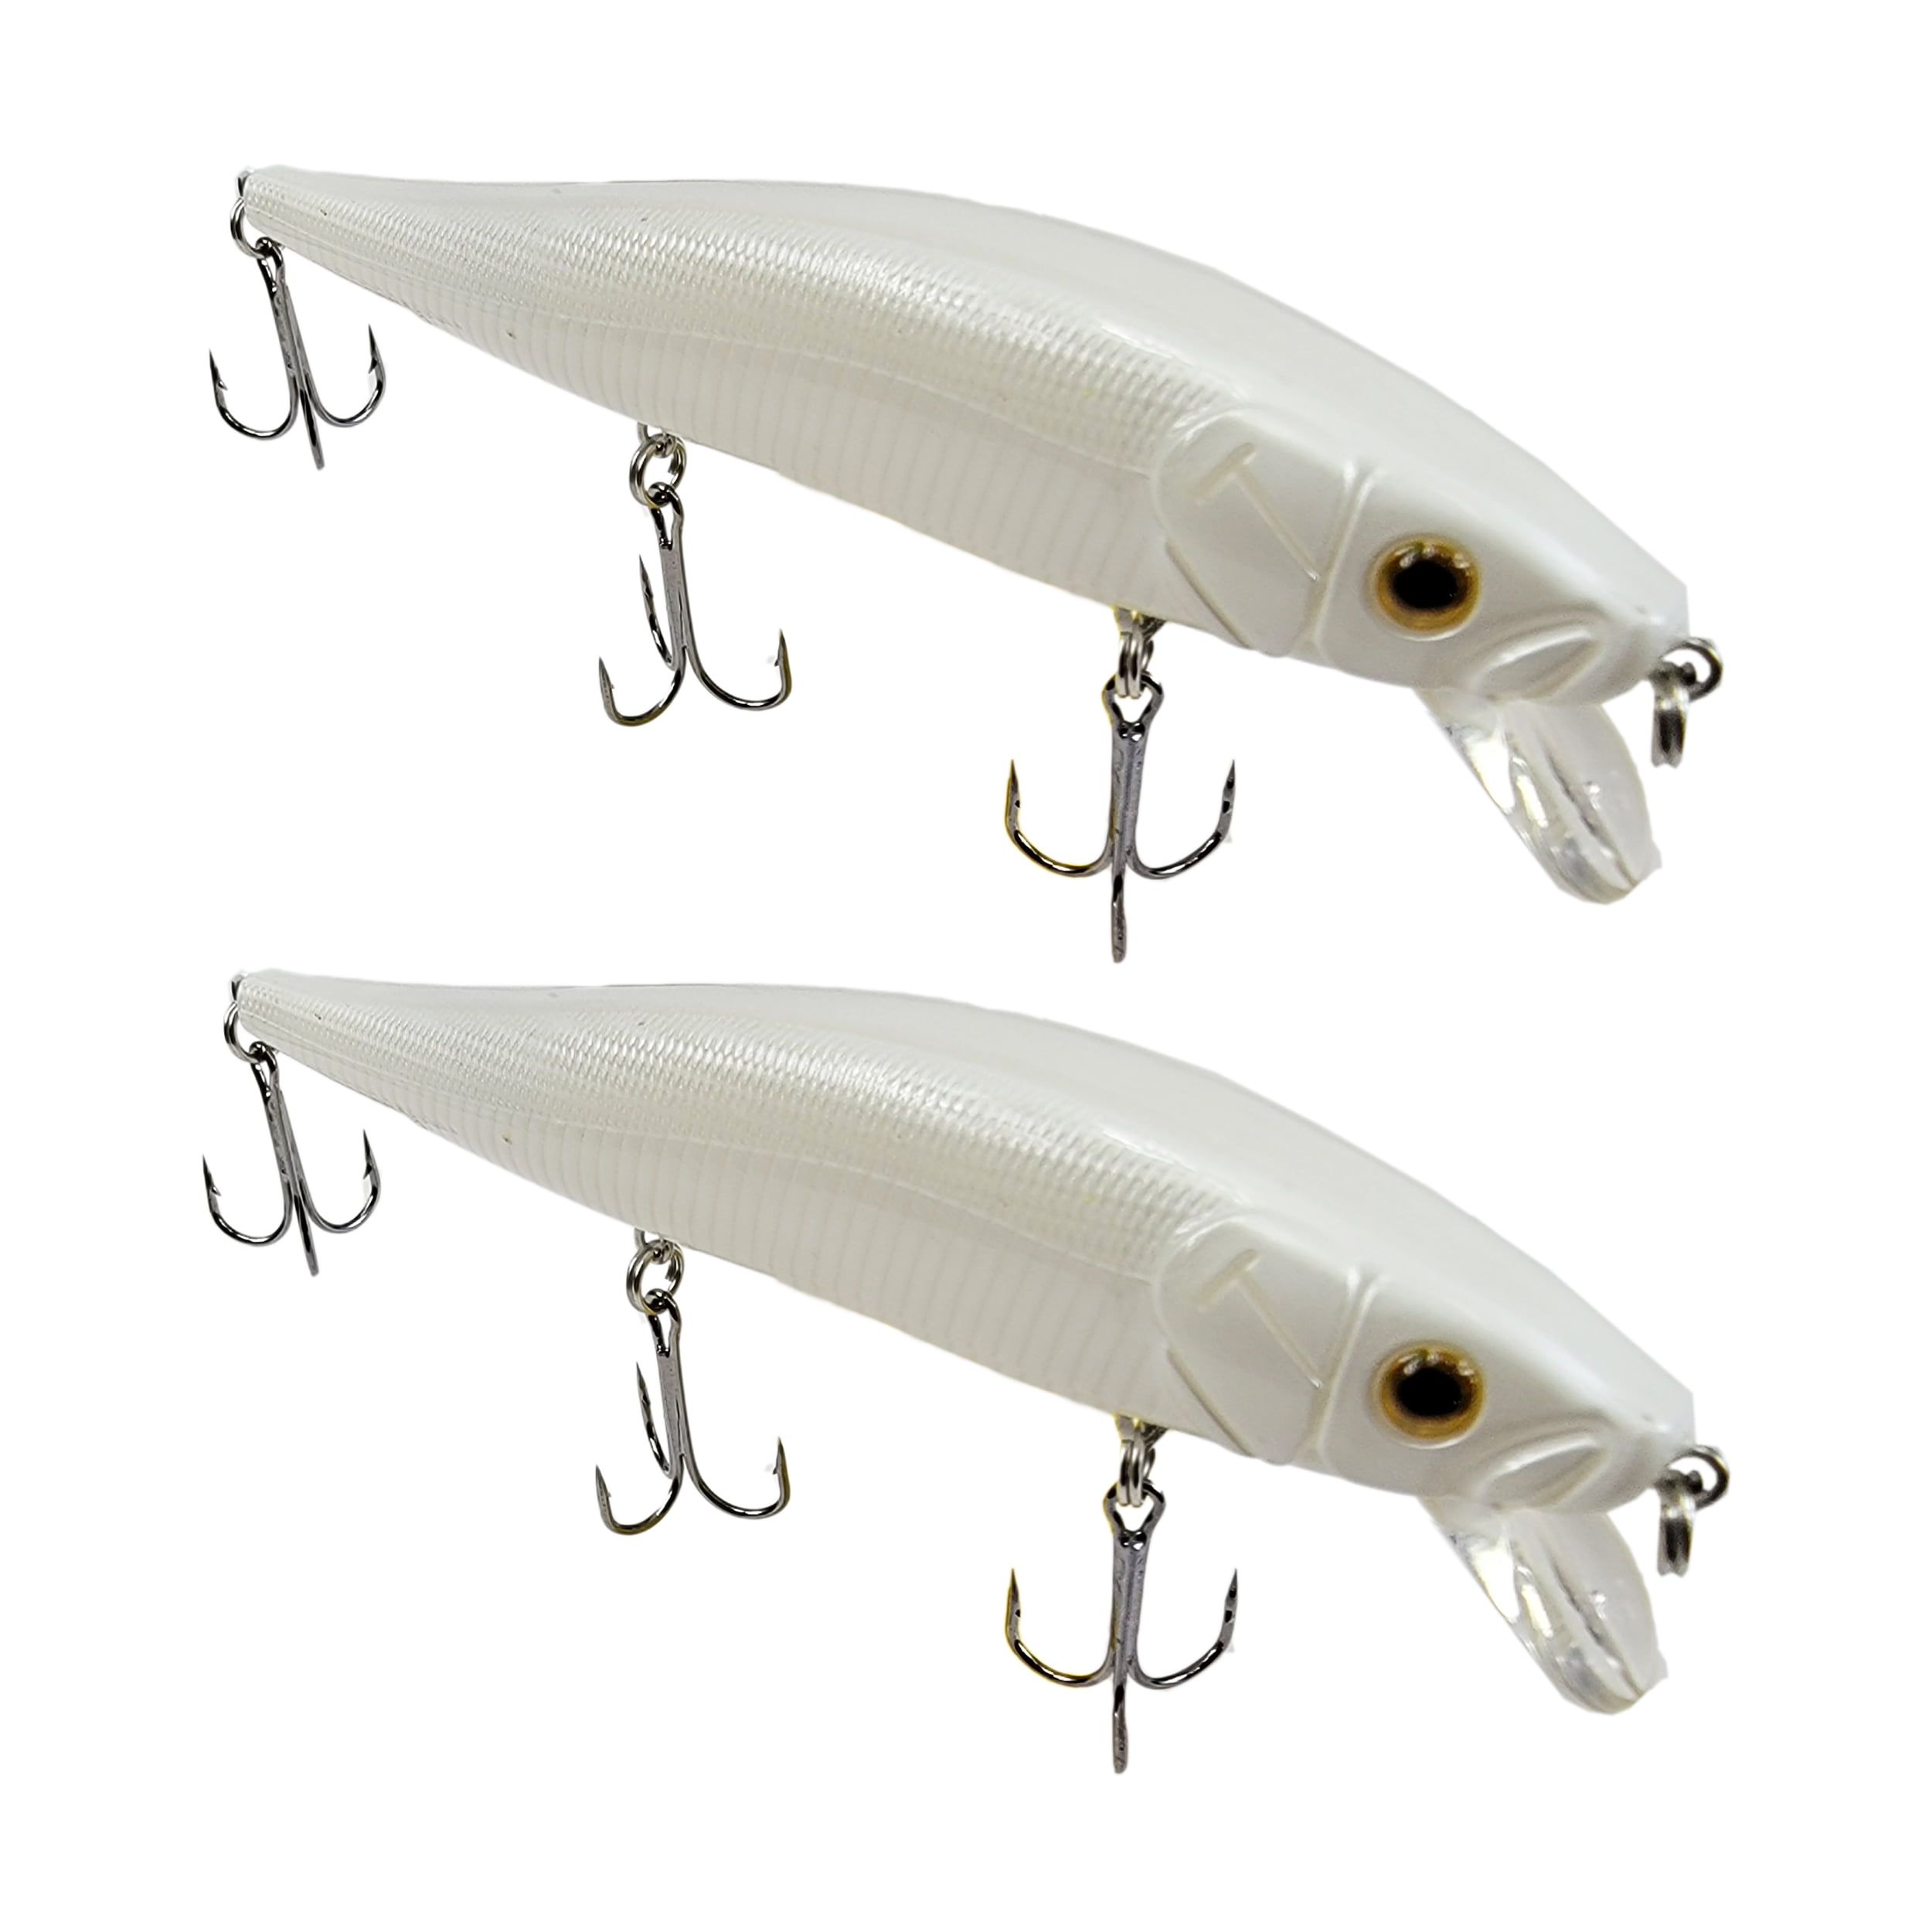 Tackle HD 2-Pack Fiddle-Styx Magnum Jerkbait, 5 1/2 x 5/8 Suspending Jerk  Baits, Freshwater or Saltwater Fishing Lures, Trout, Crappie, Walleye, or  Bass Lures, Clown 